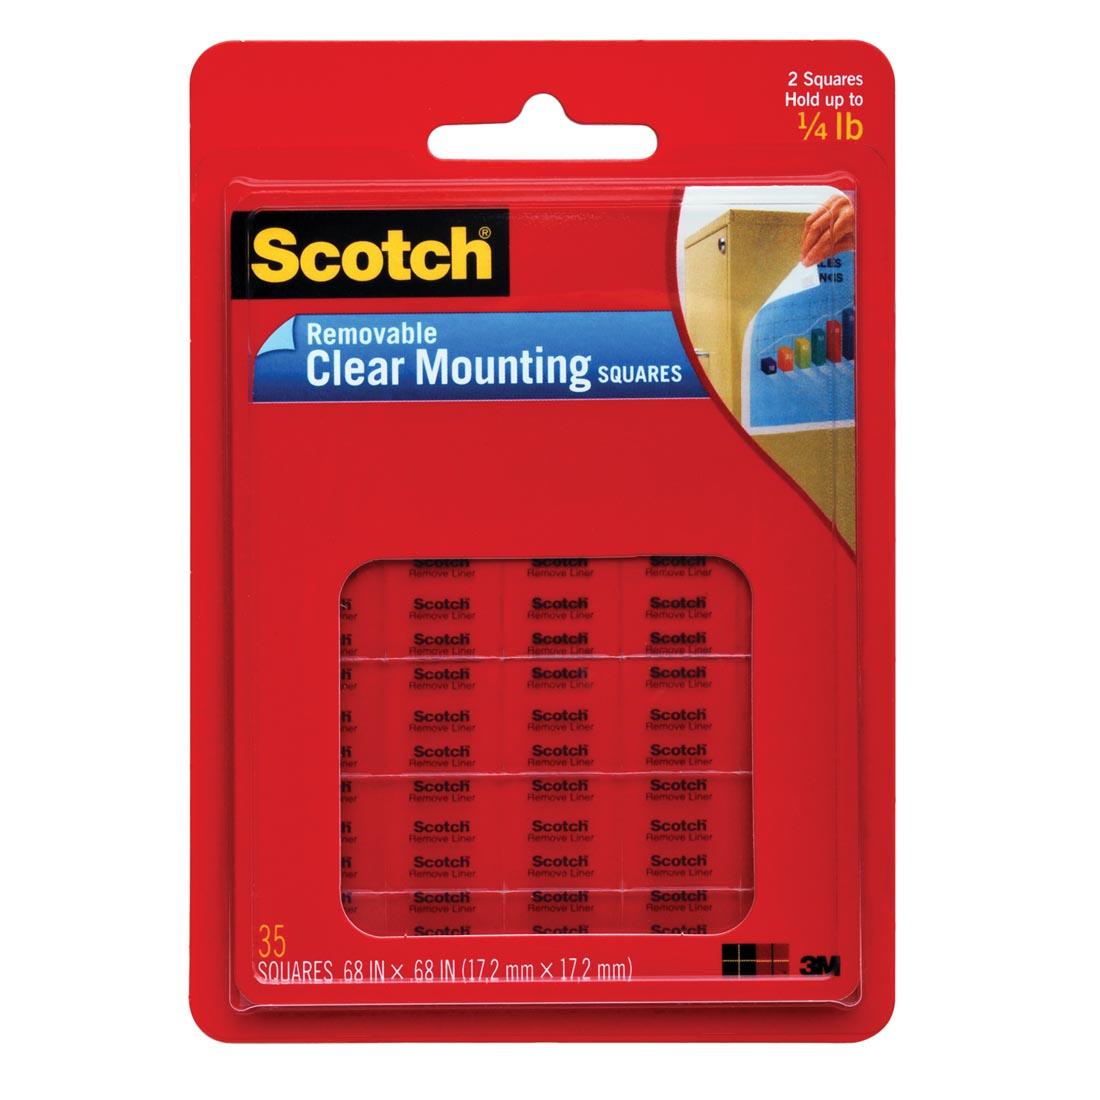 Scotch Clear Removeable Mounting Squares package, 35 squares